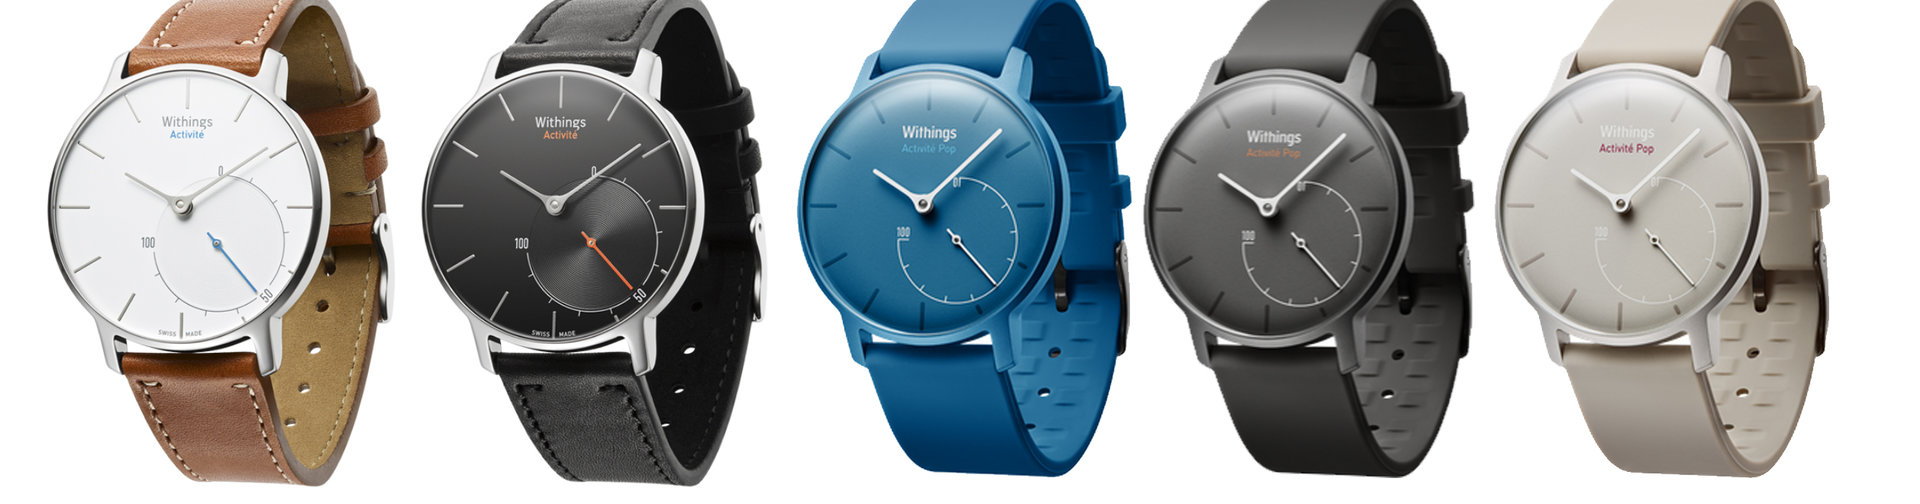 Withings Activité und Withings Activité Pop